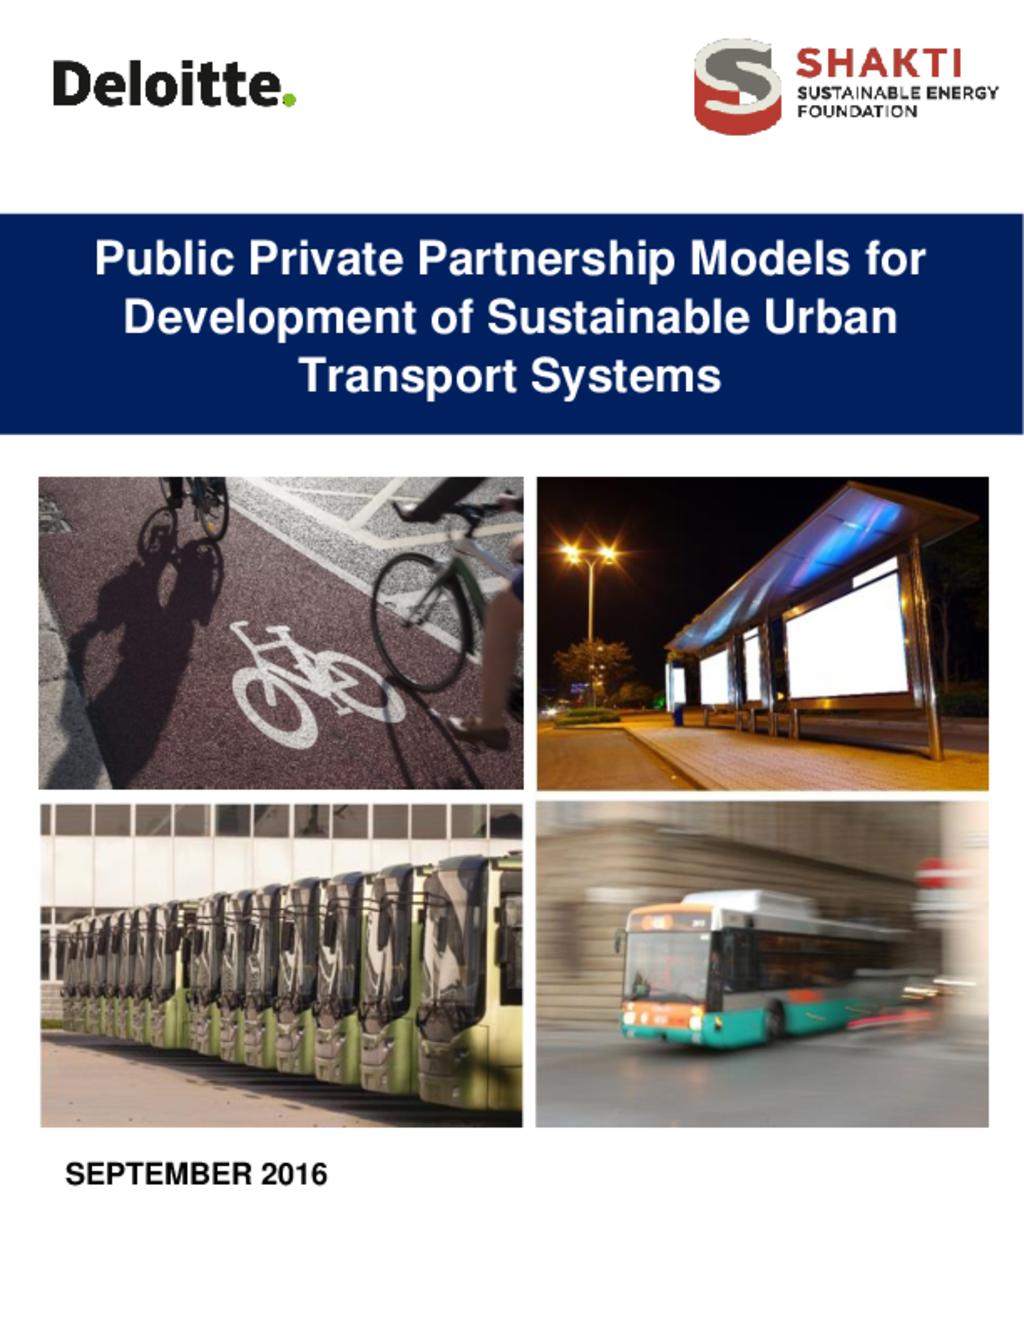 Public Private Partnership Models for Development of Sustainable Urban Transport Systems